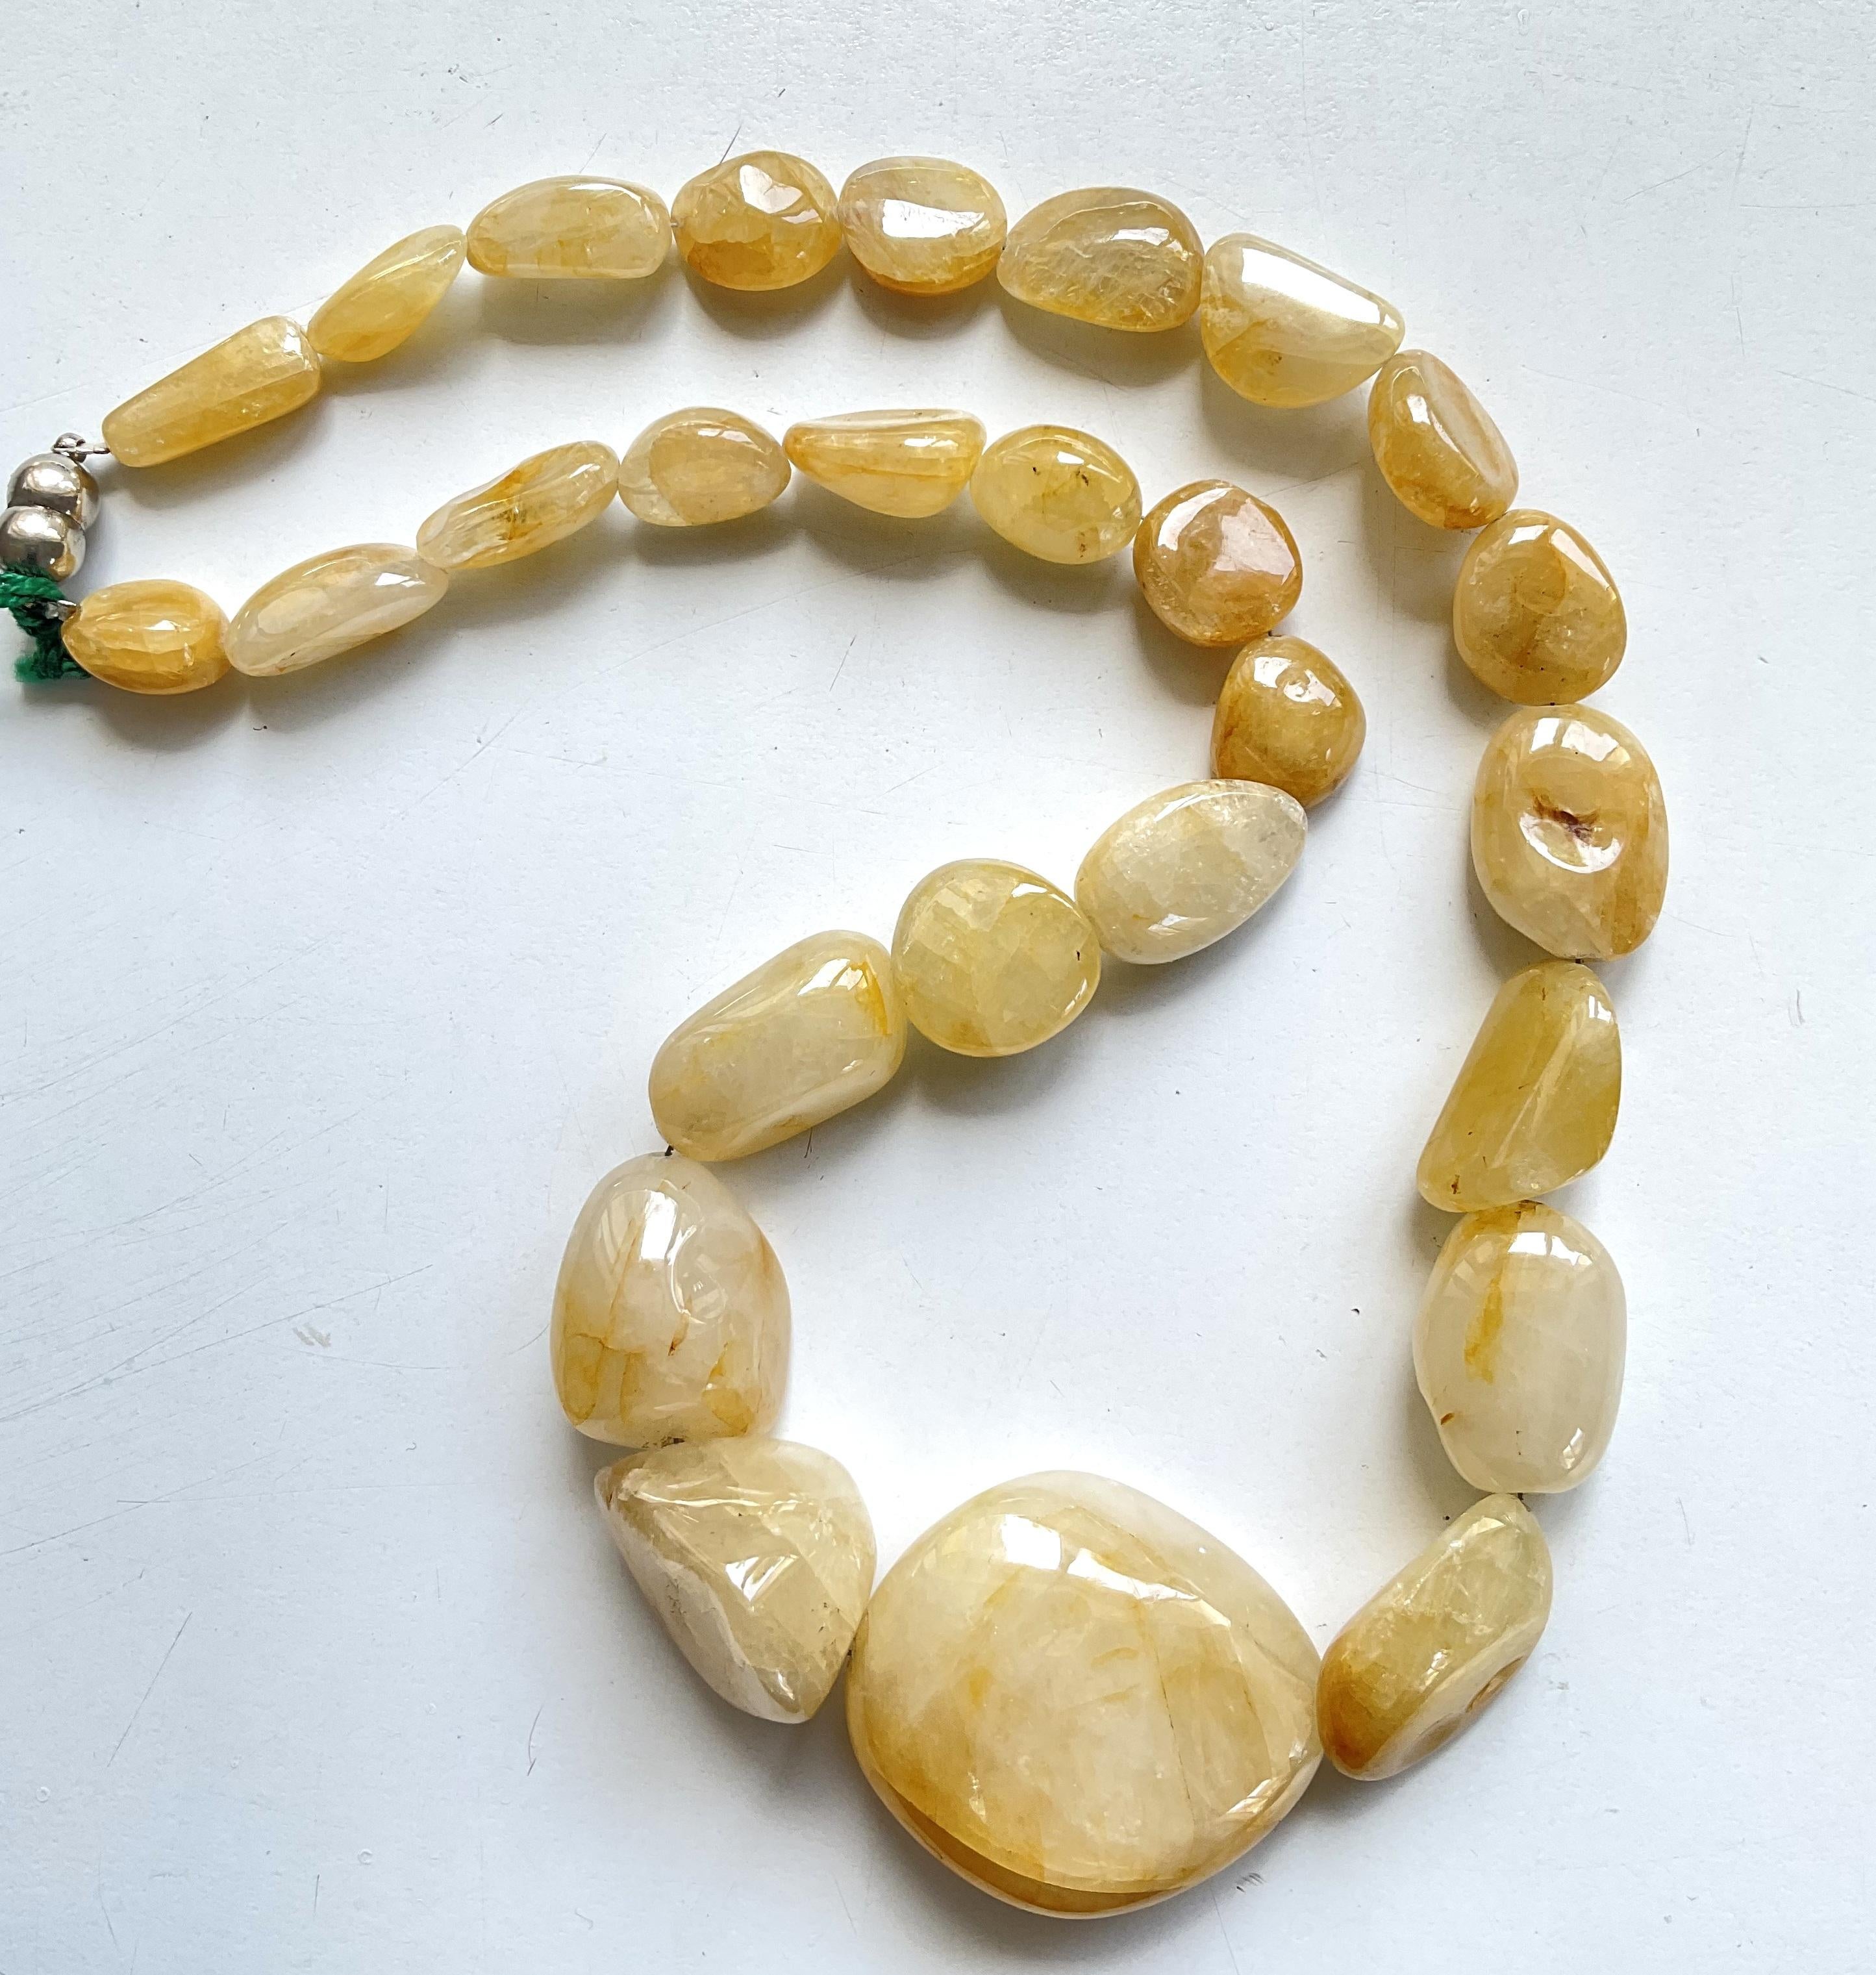 Women's or Men's 1111.20 Carats Big Size Yellow Sapphire Plain Tumbled Natural Gemstone Necklace For Sale